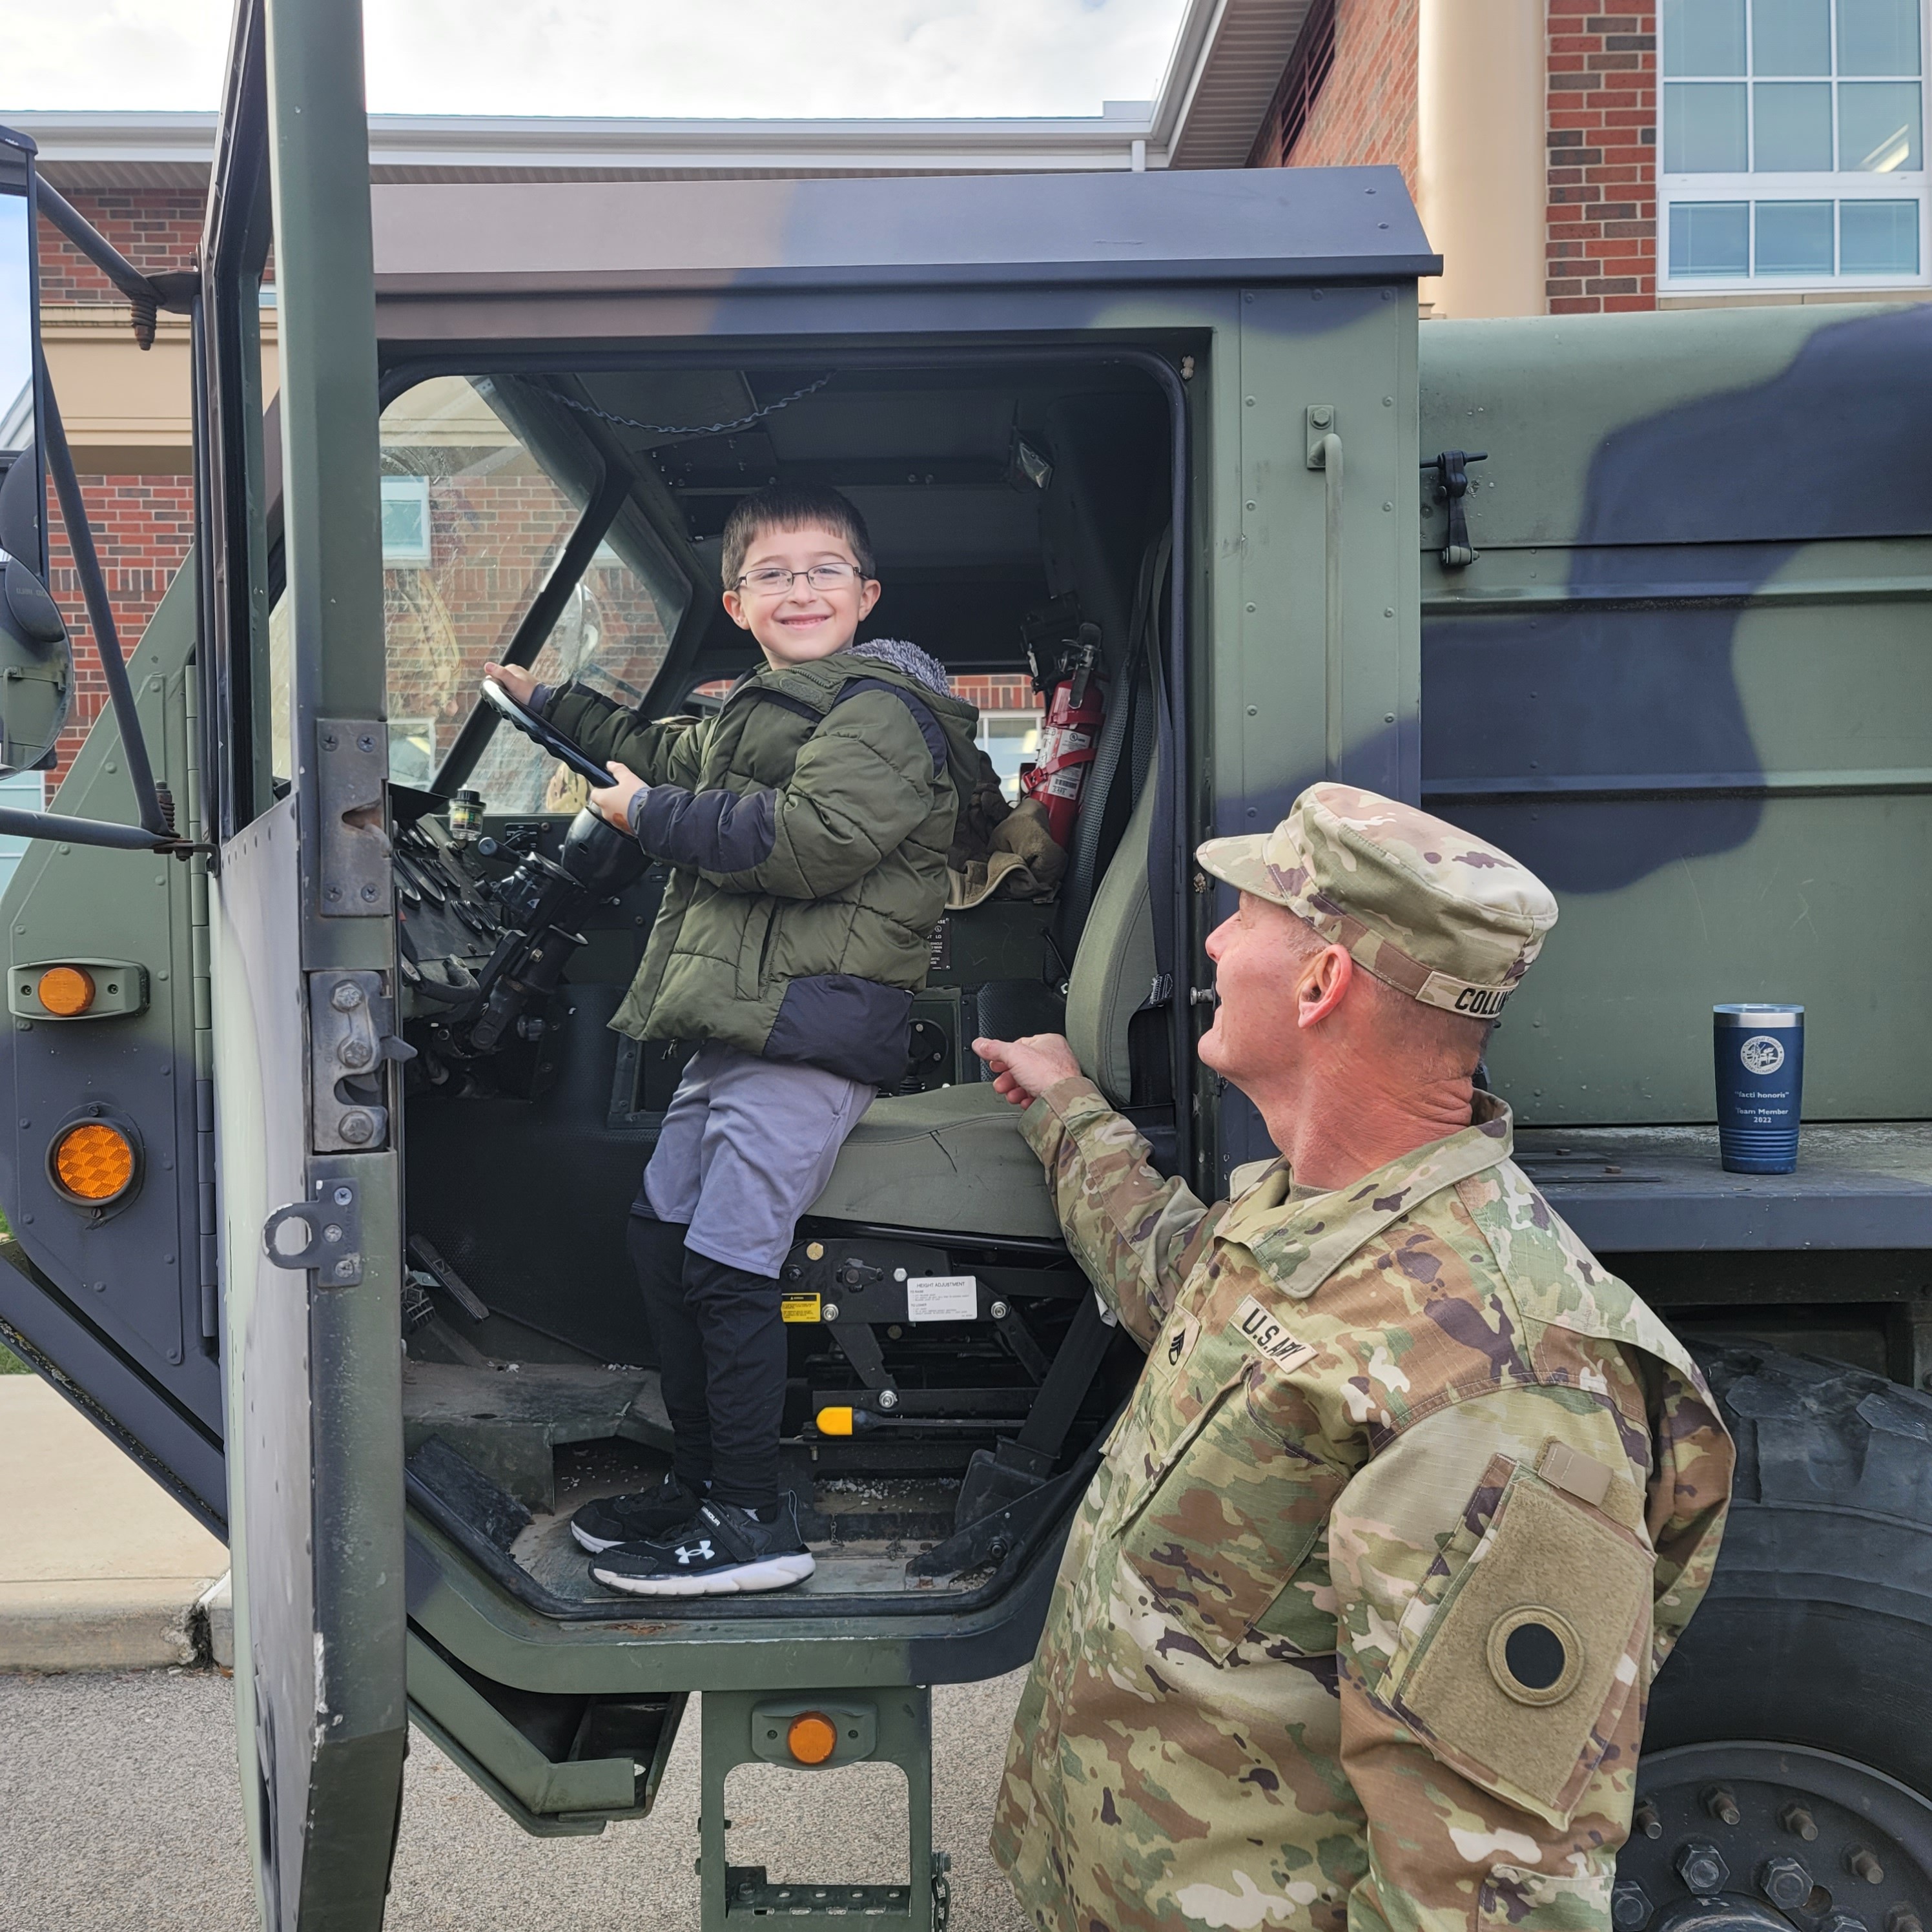 Student in Driver Seat of Military Vehicle